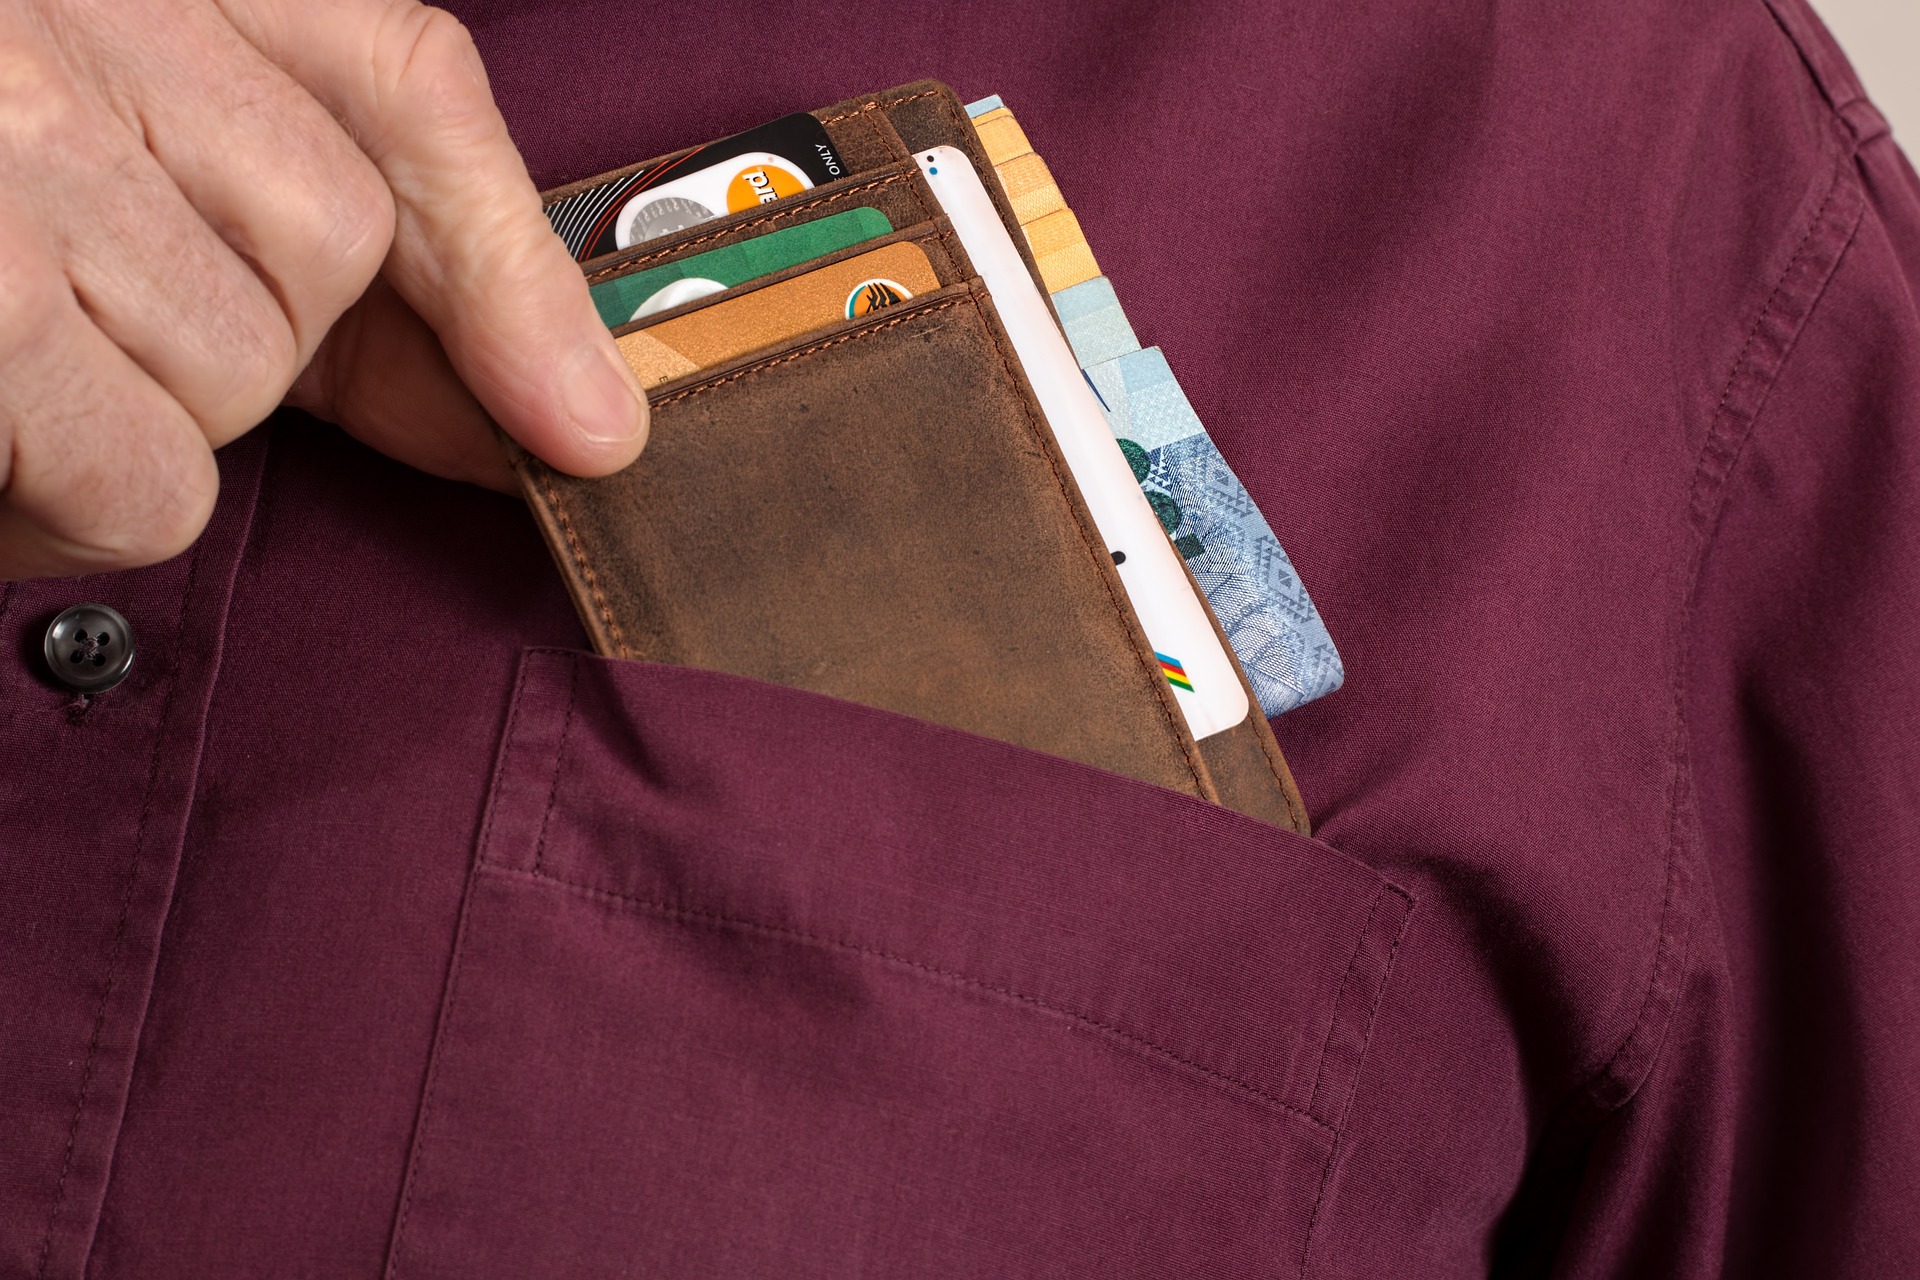 putting credit cards in a shirt pocket